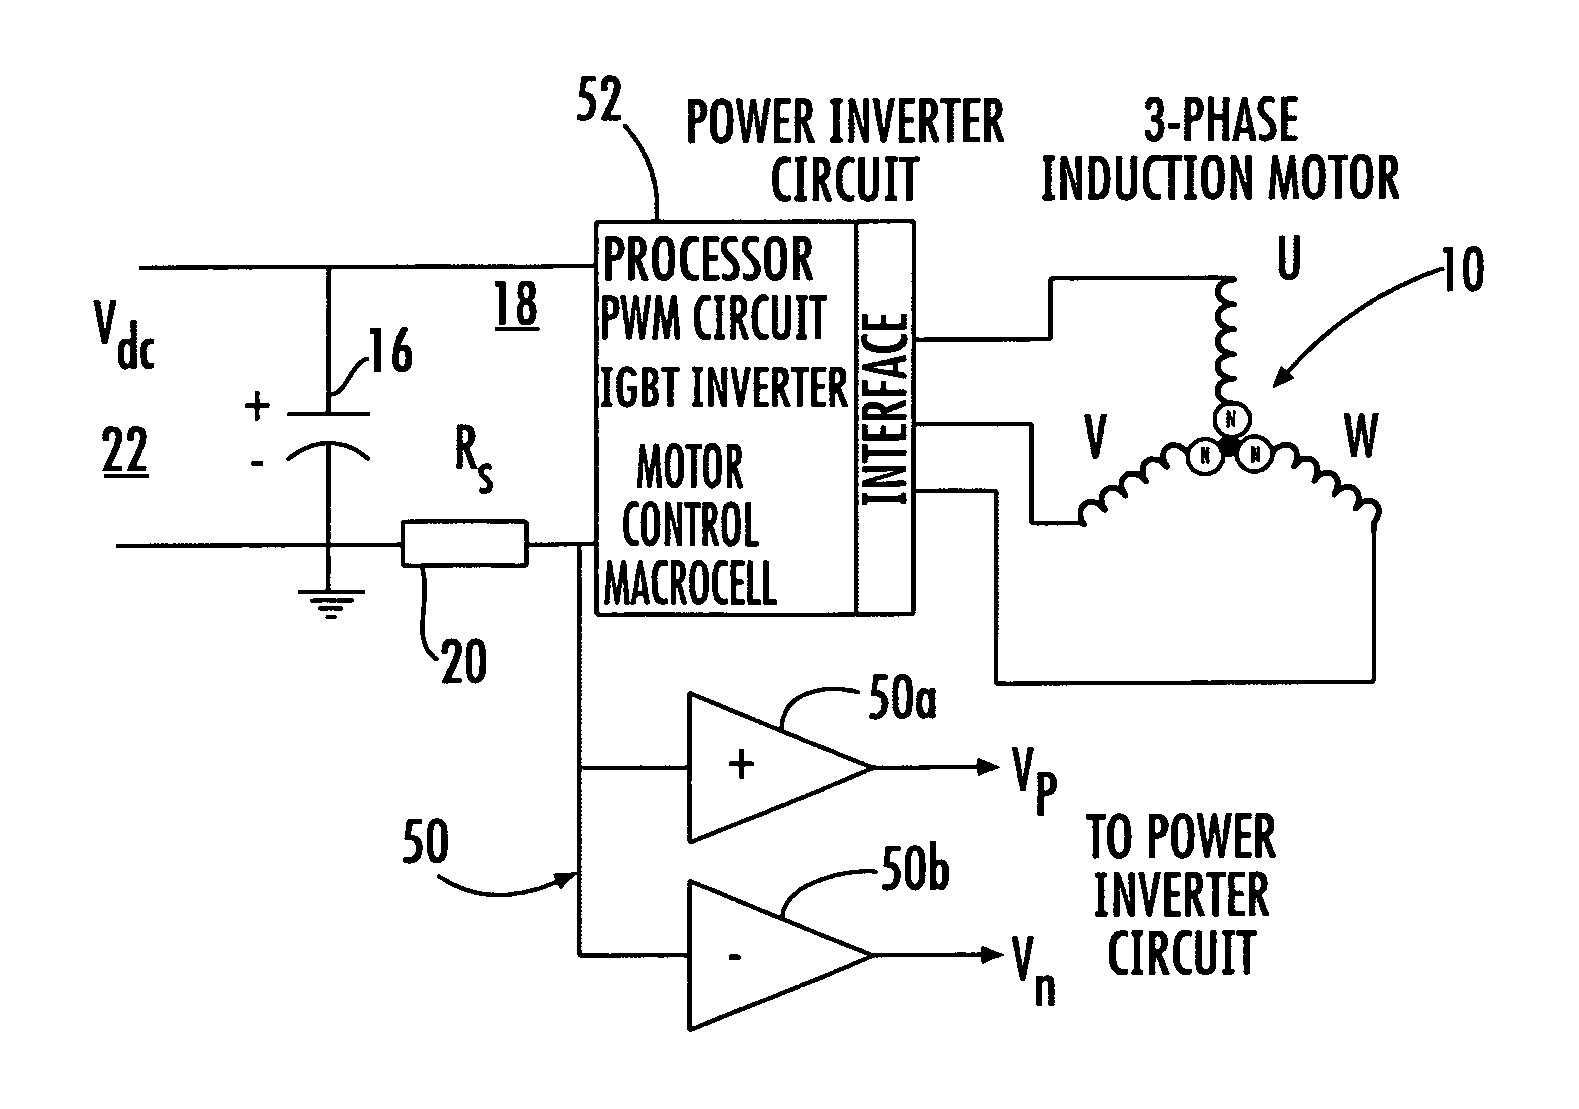 System and method for controlling an induction motor